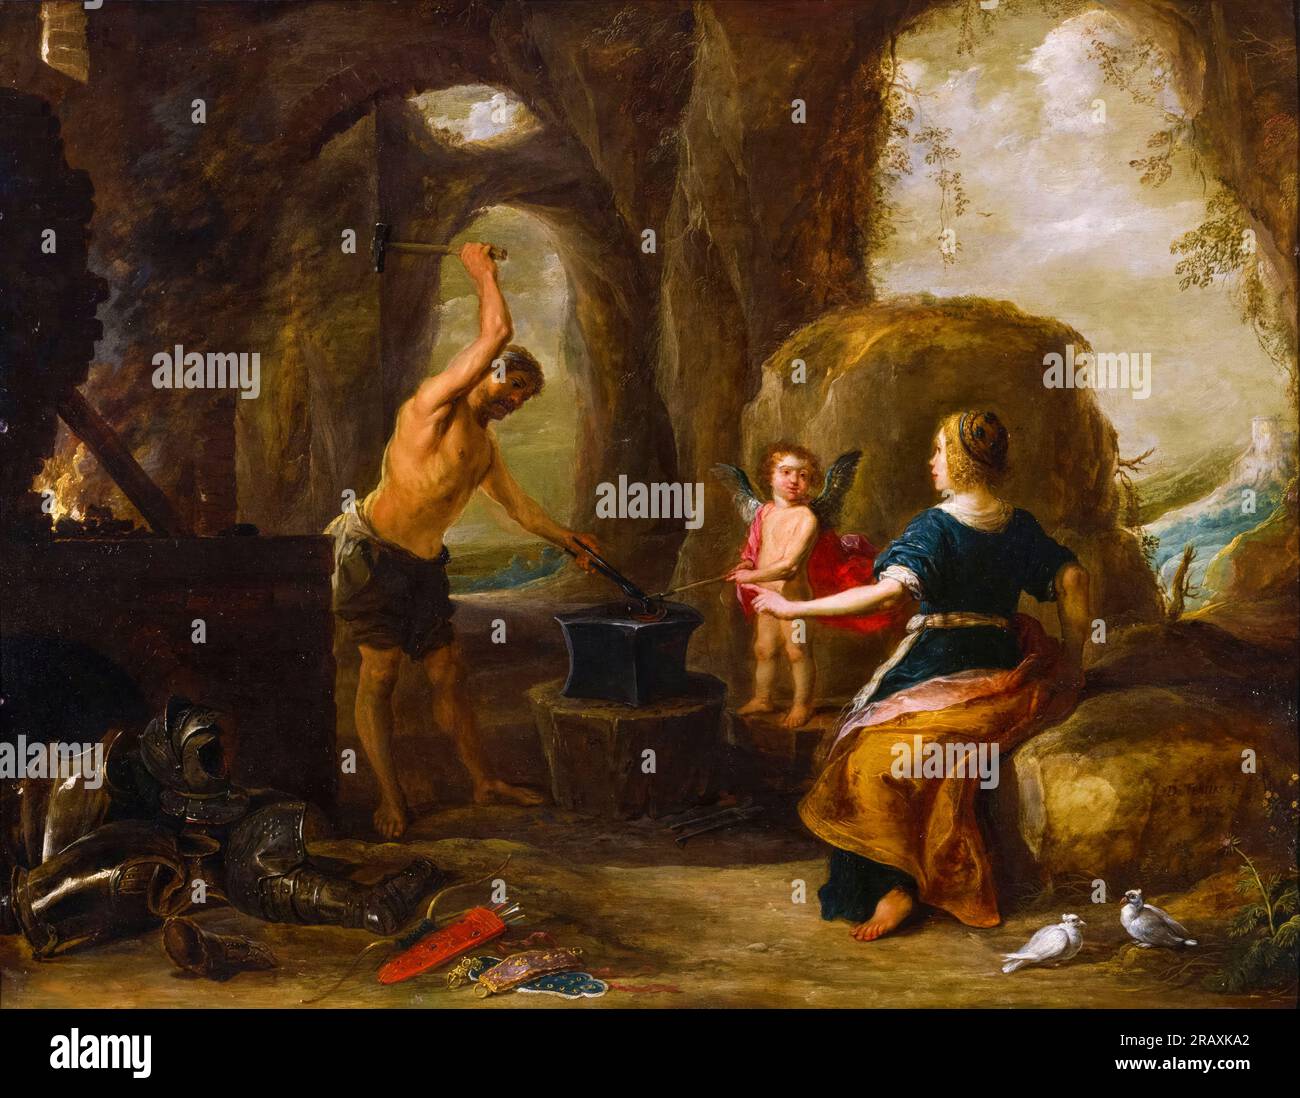 David Teniers the Elder, Venus visiting Vulcan’s Forge, painting in oil on copper, 1638 Stock Photo